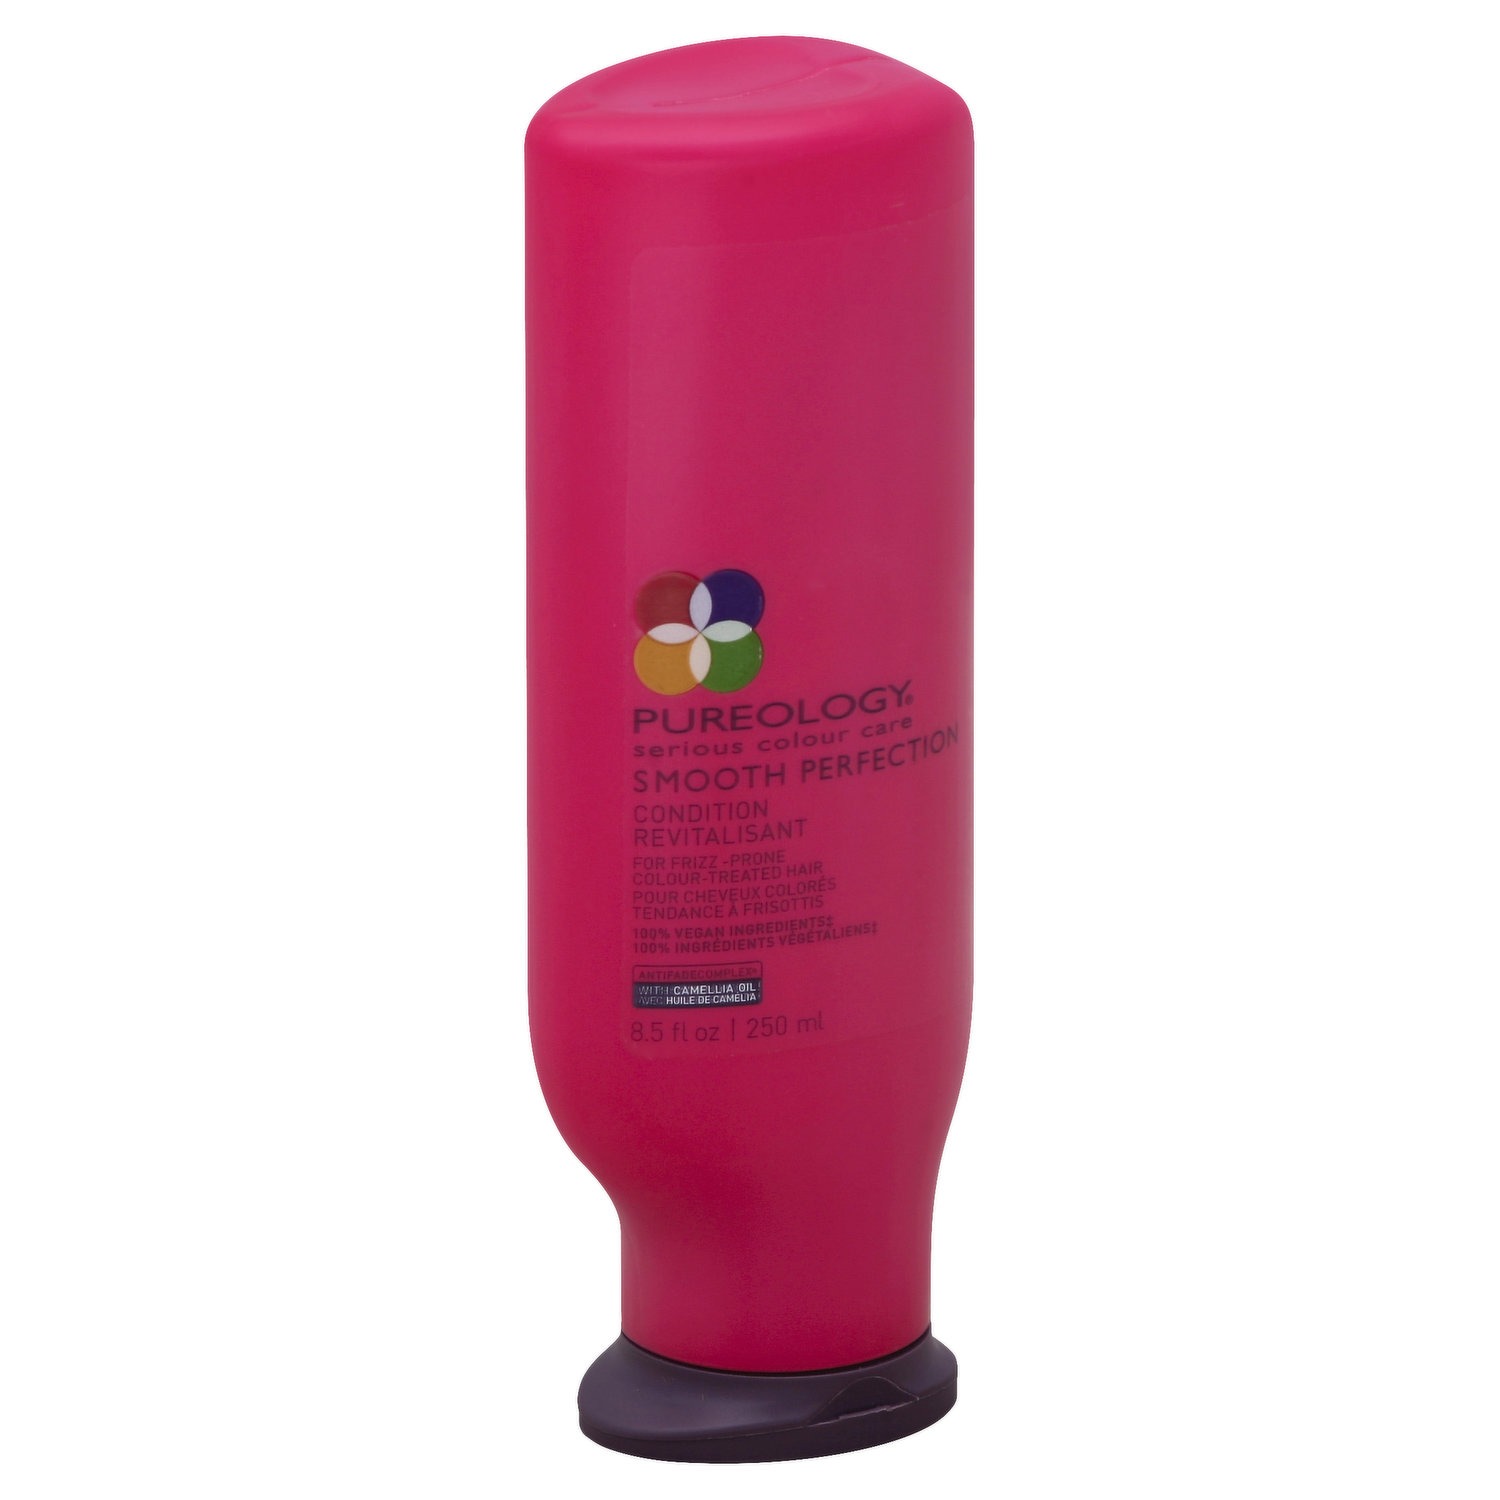 Pureology Condition, for Frizz-Prone Colour Treated Hair - FRESH